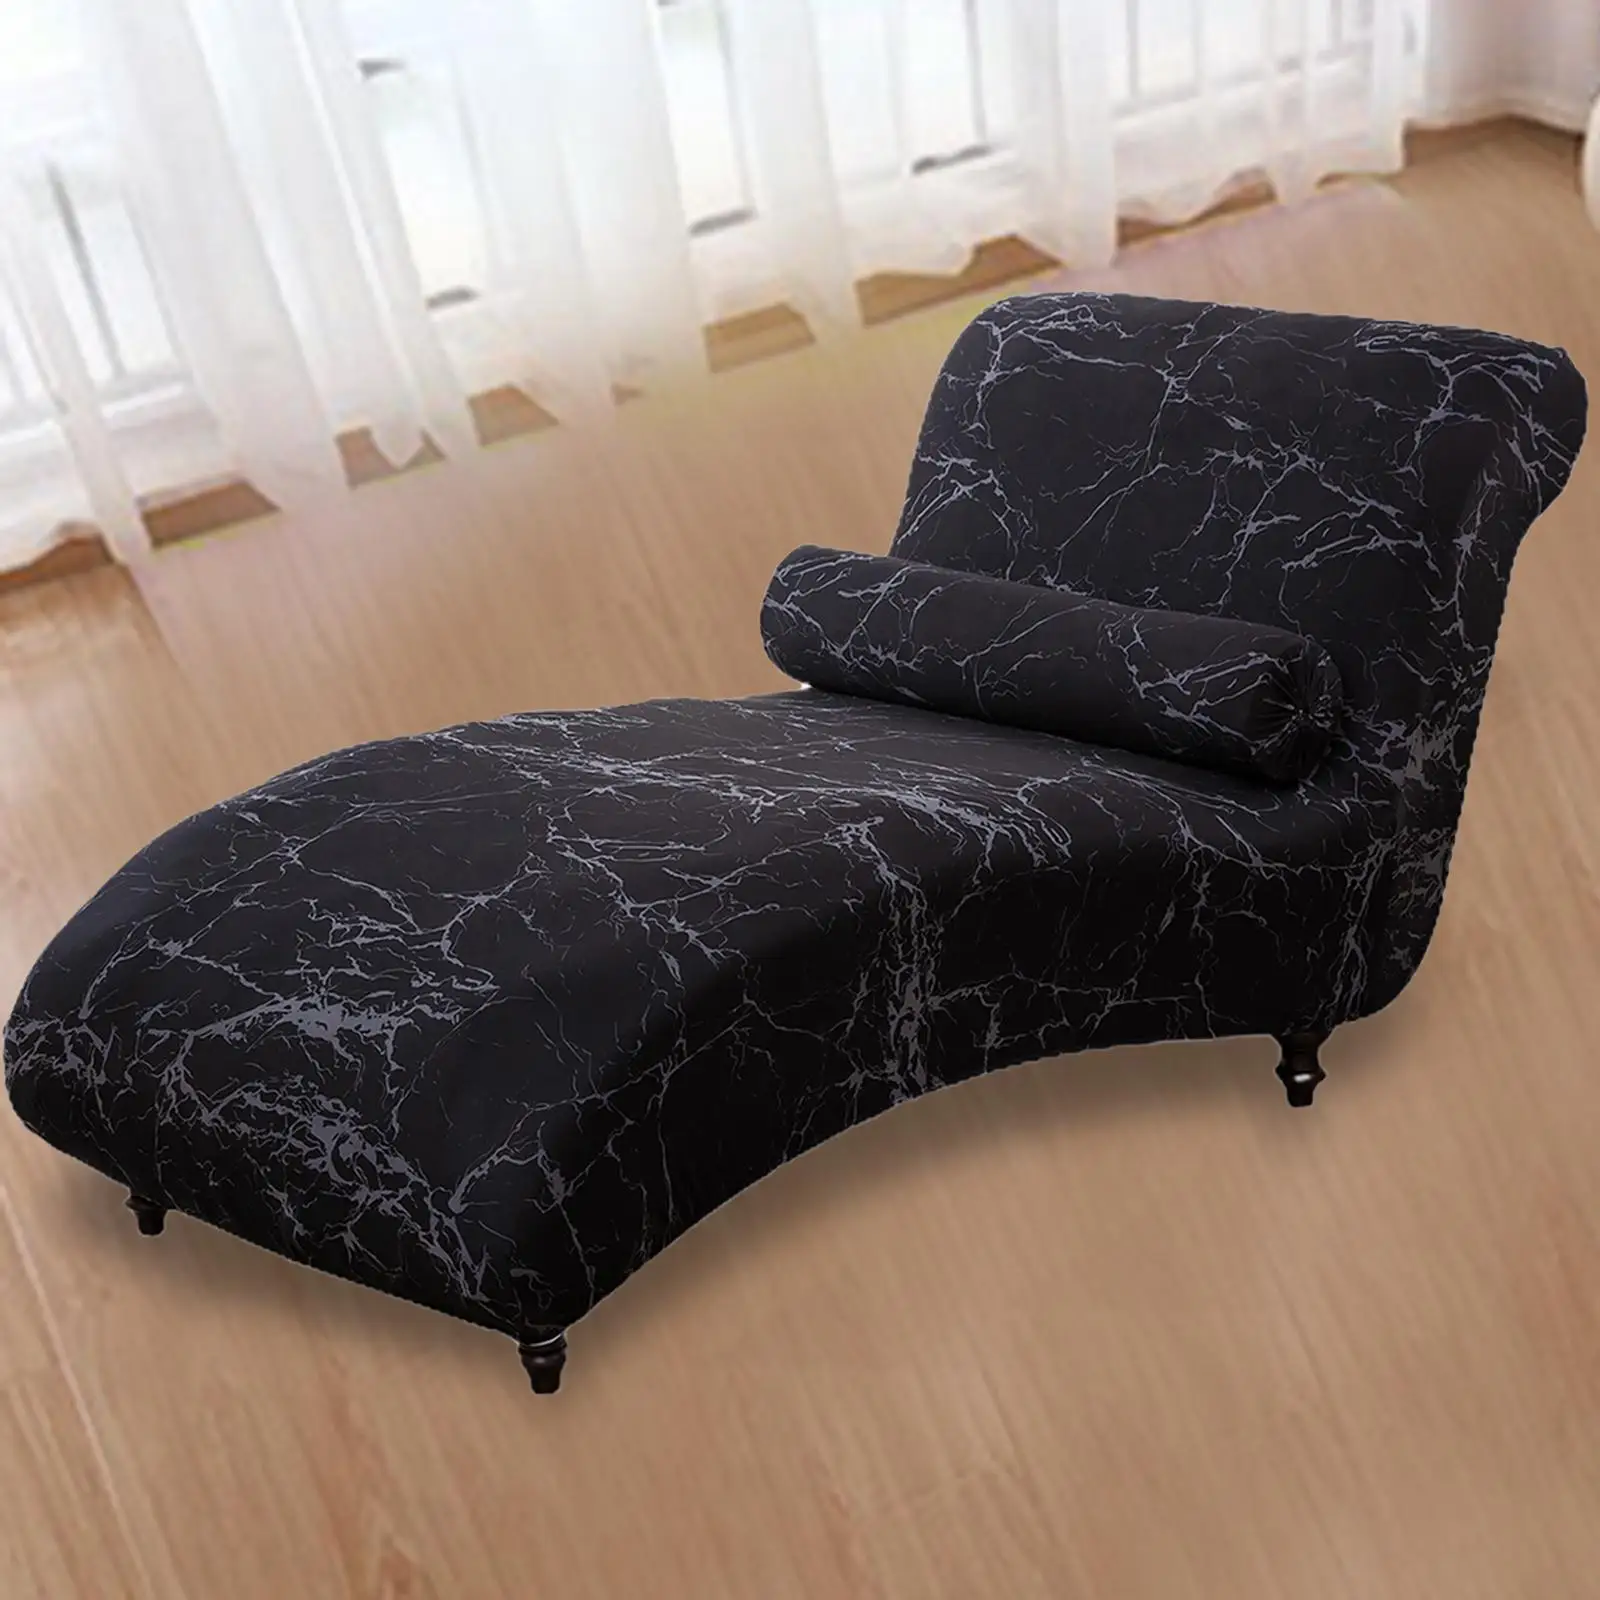 Indoor Spandex Stretch Chaise Lounge Cover Living Room Bedroom for Chaise Lounge Soft Jacquard Fabric Machine Washable